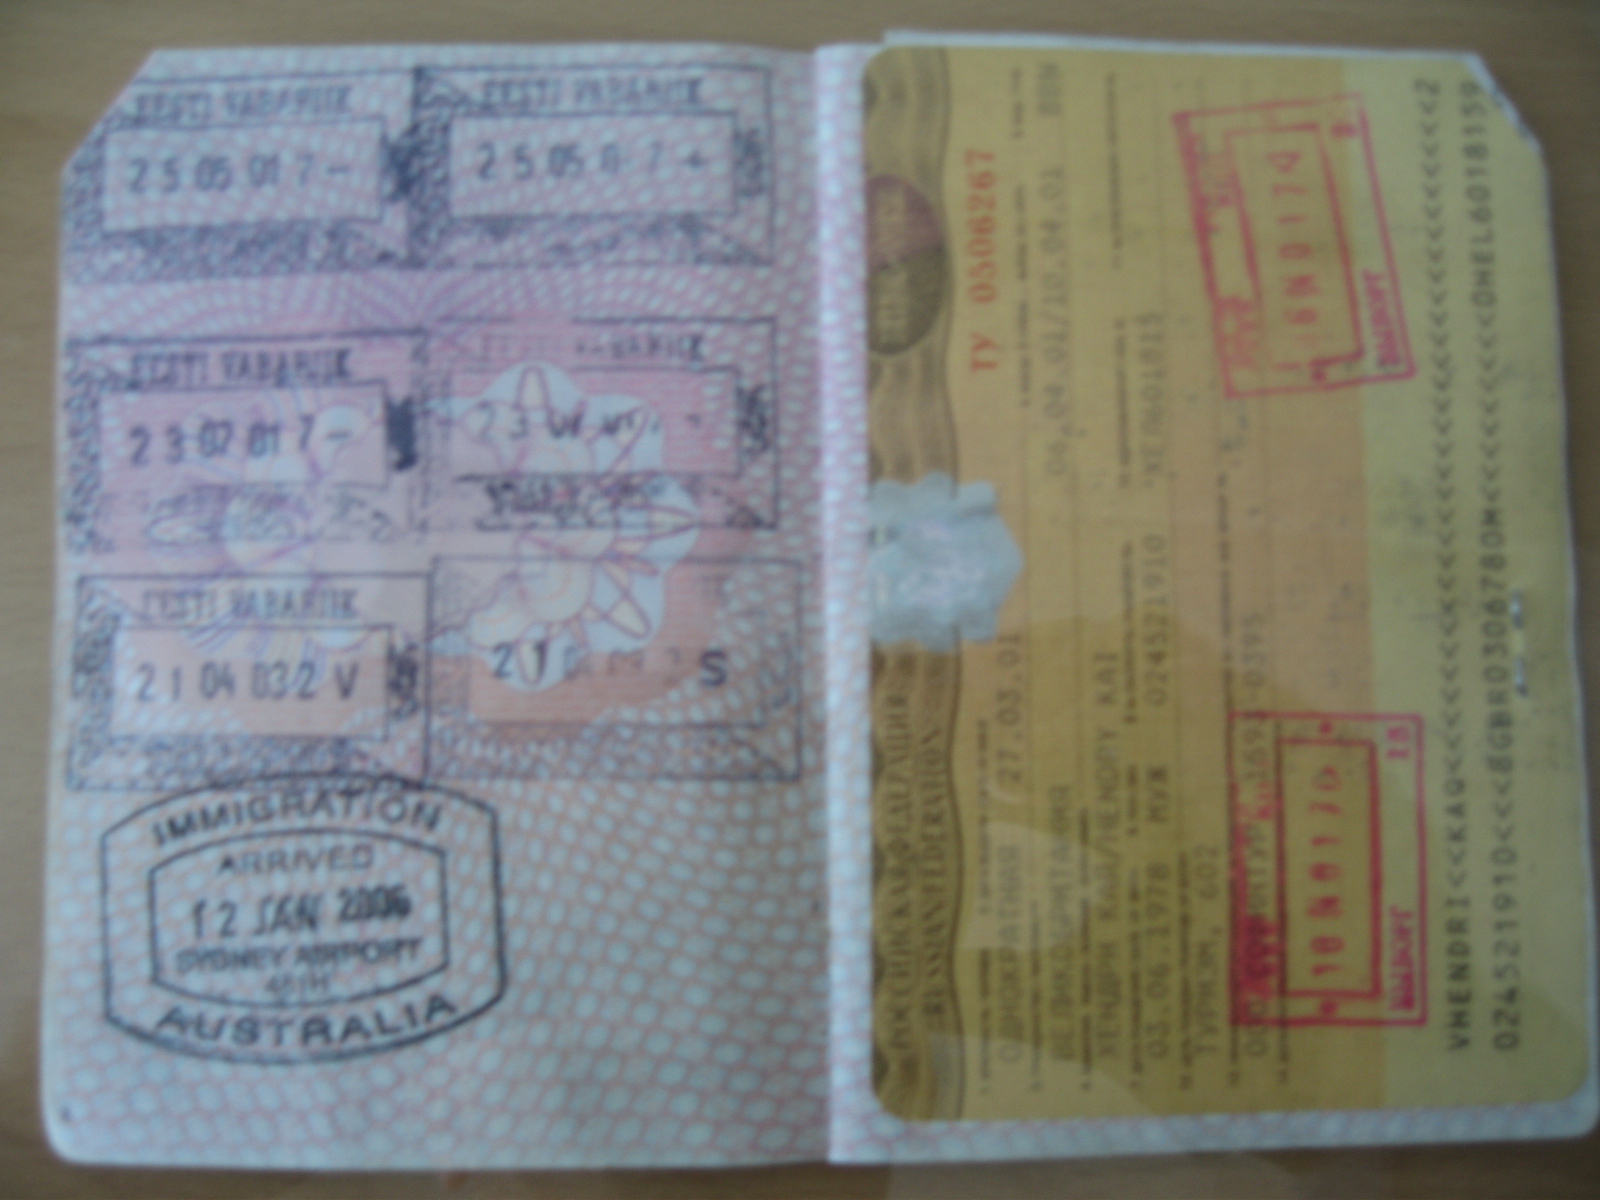 there are three passport id holders that have stamps on them